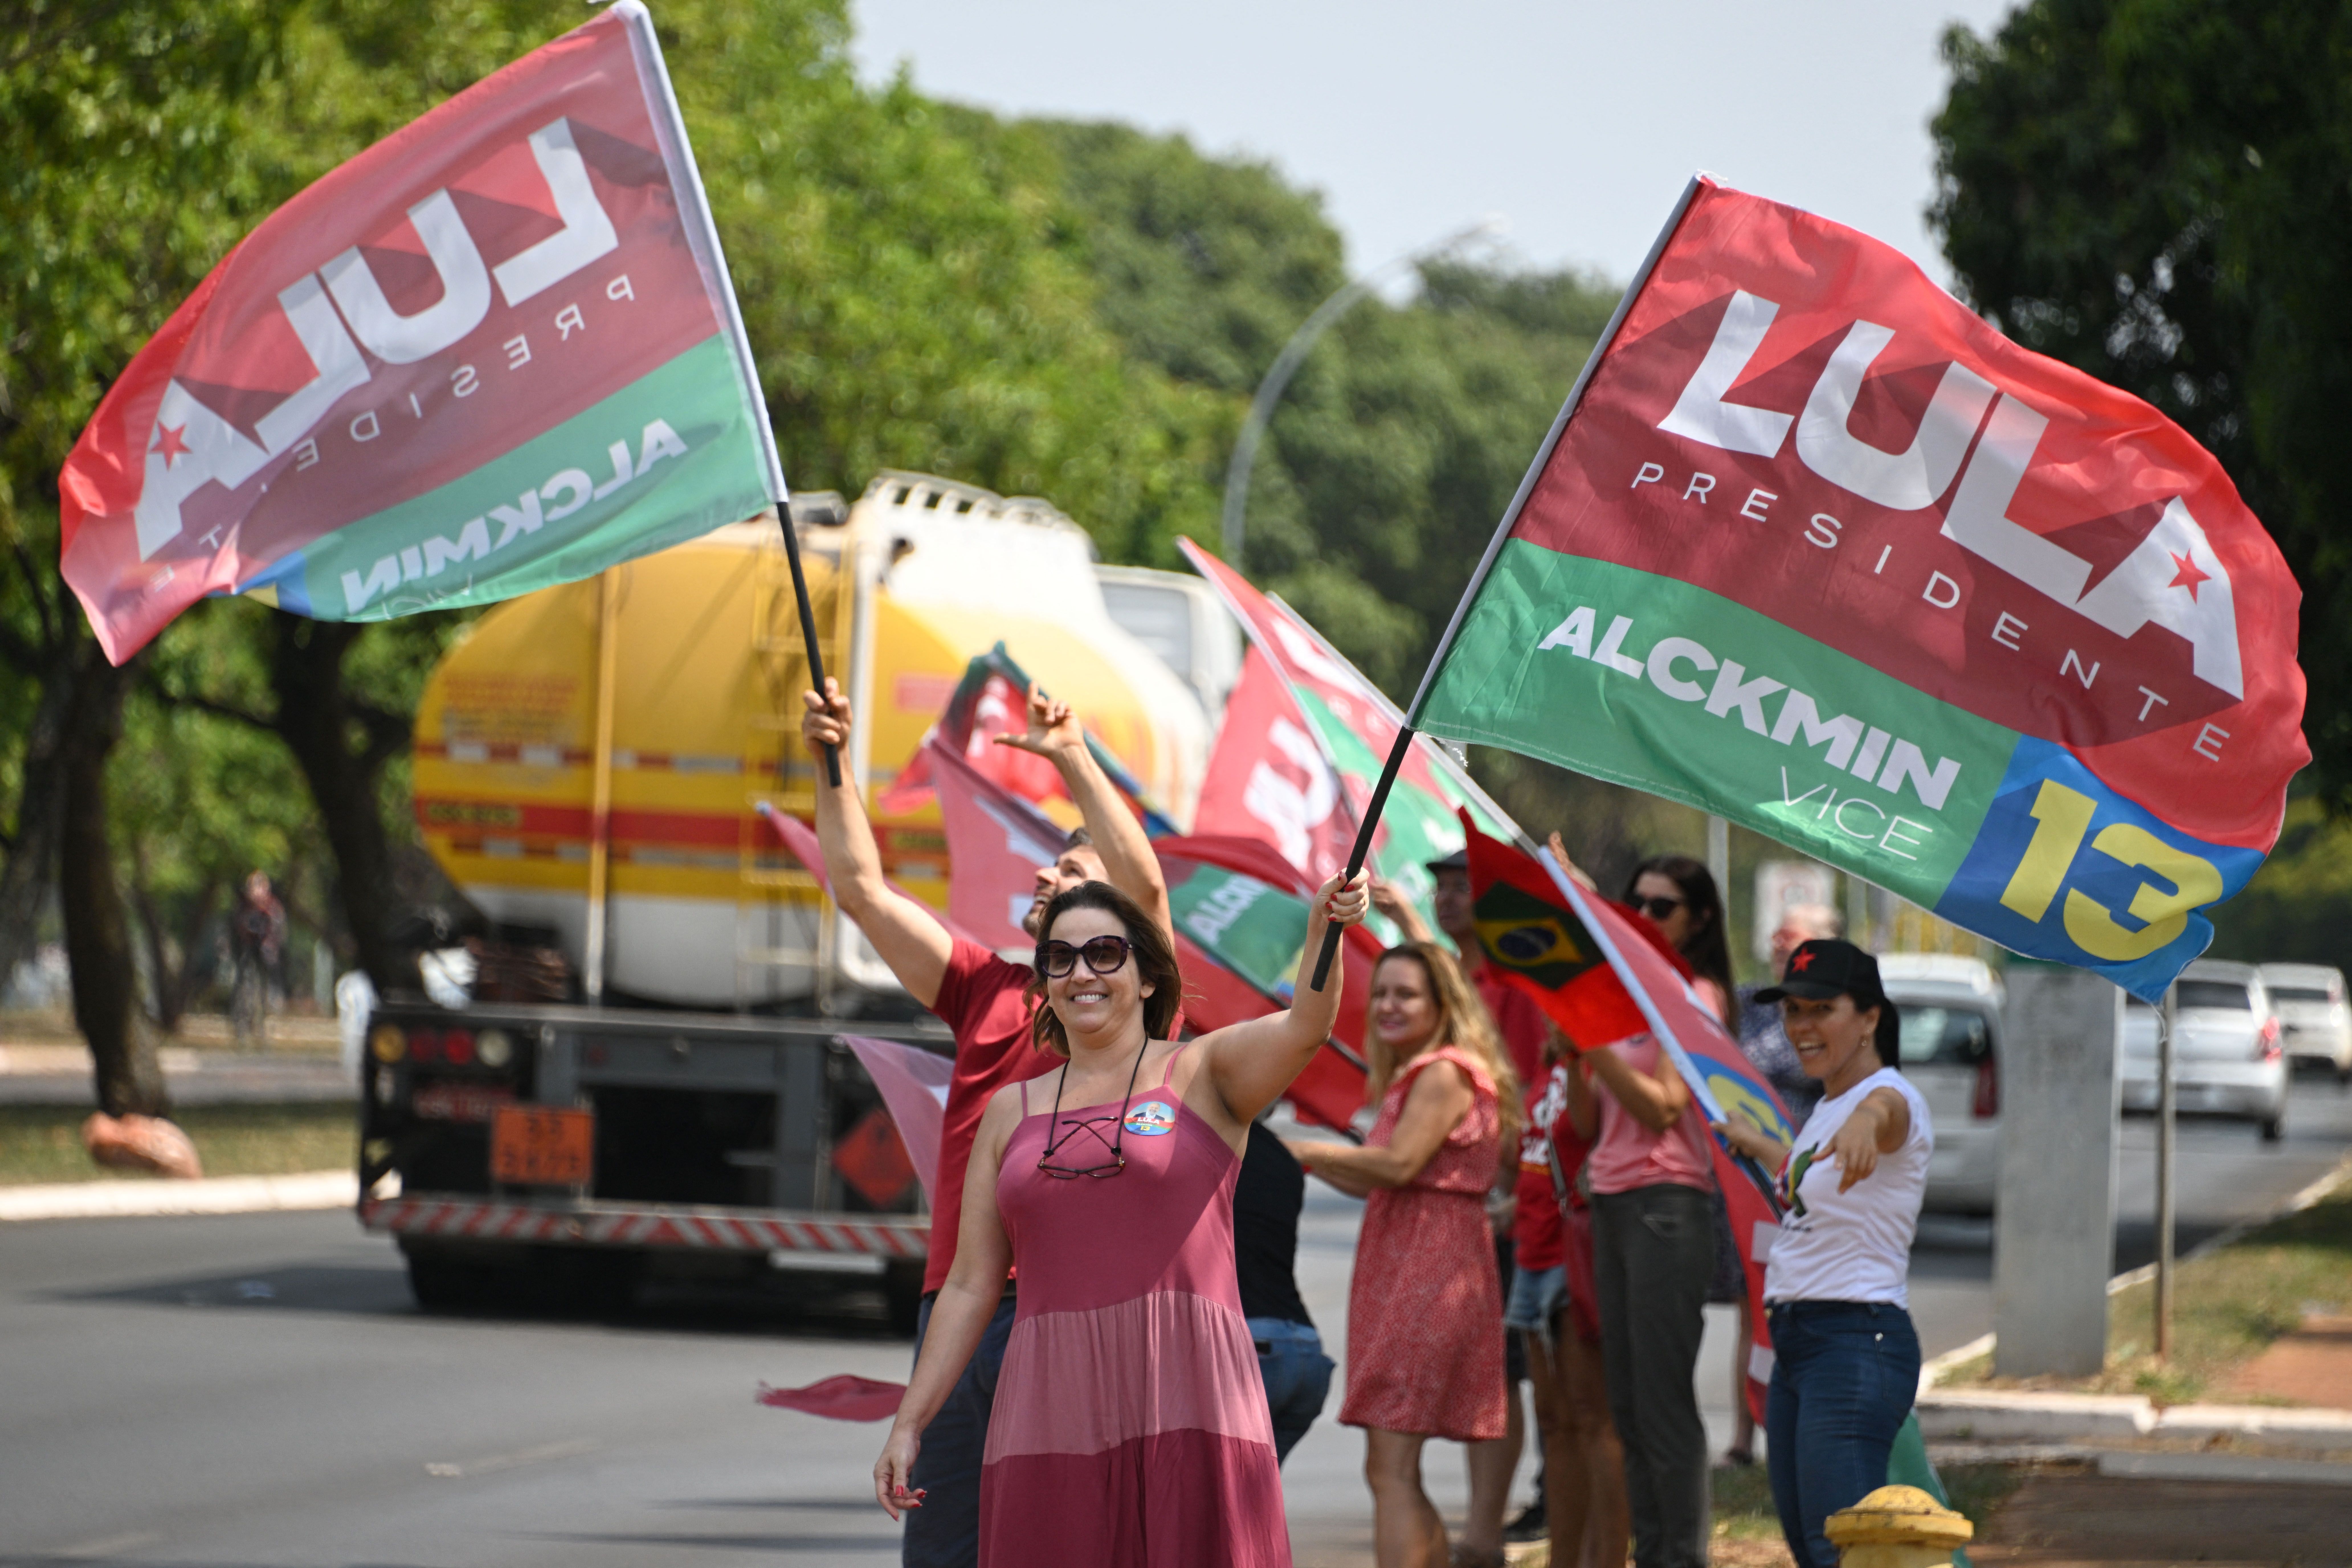 Brazilian voters wave red, green, and blue flags supporting presidential candidate Luiz Inácio Lula da Silva in an upcoming runoff election.